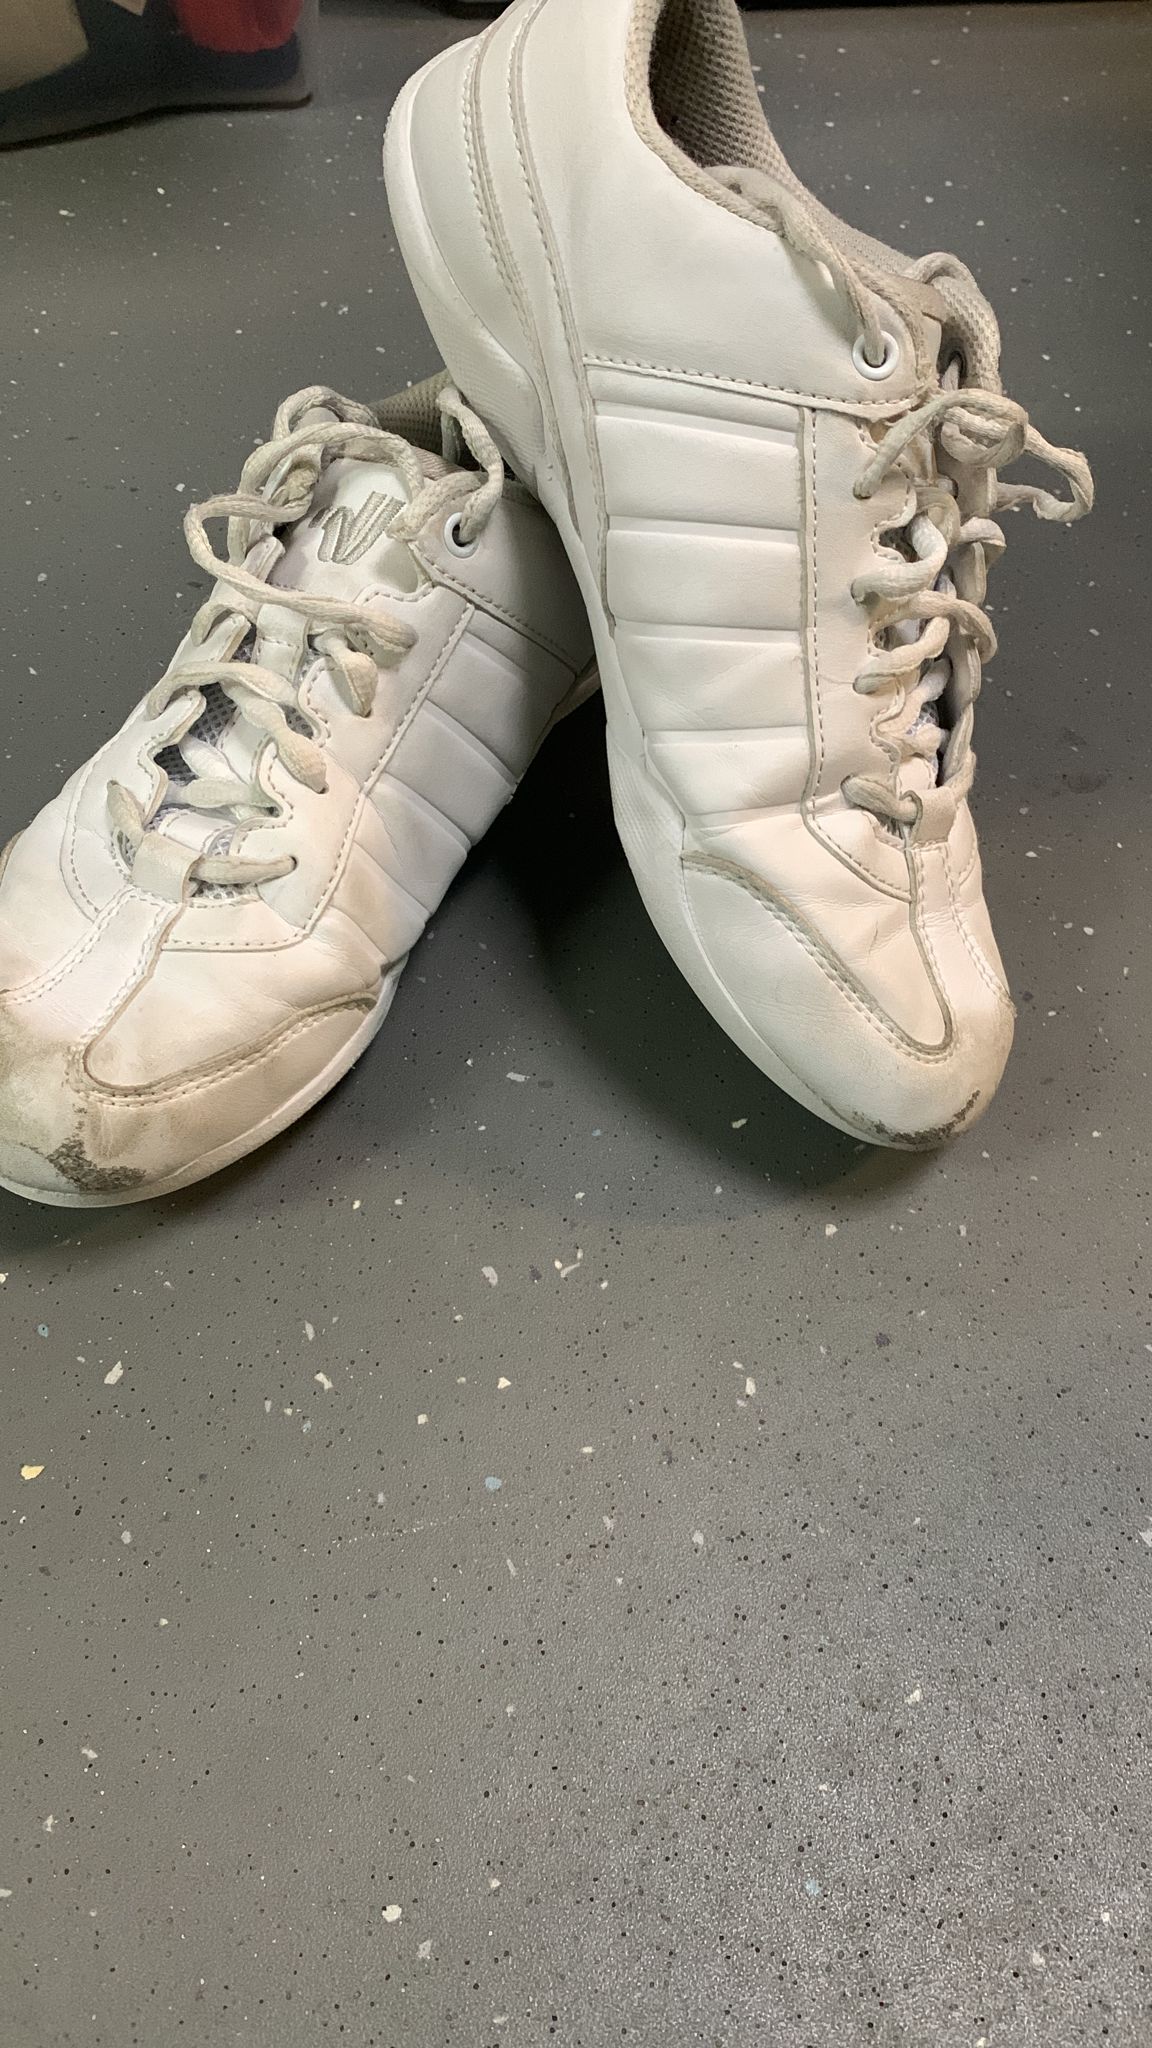 Cheer Shoes - Size UK 5